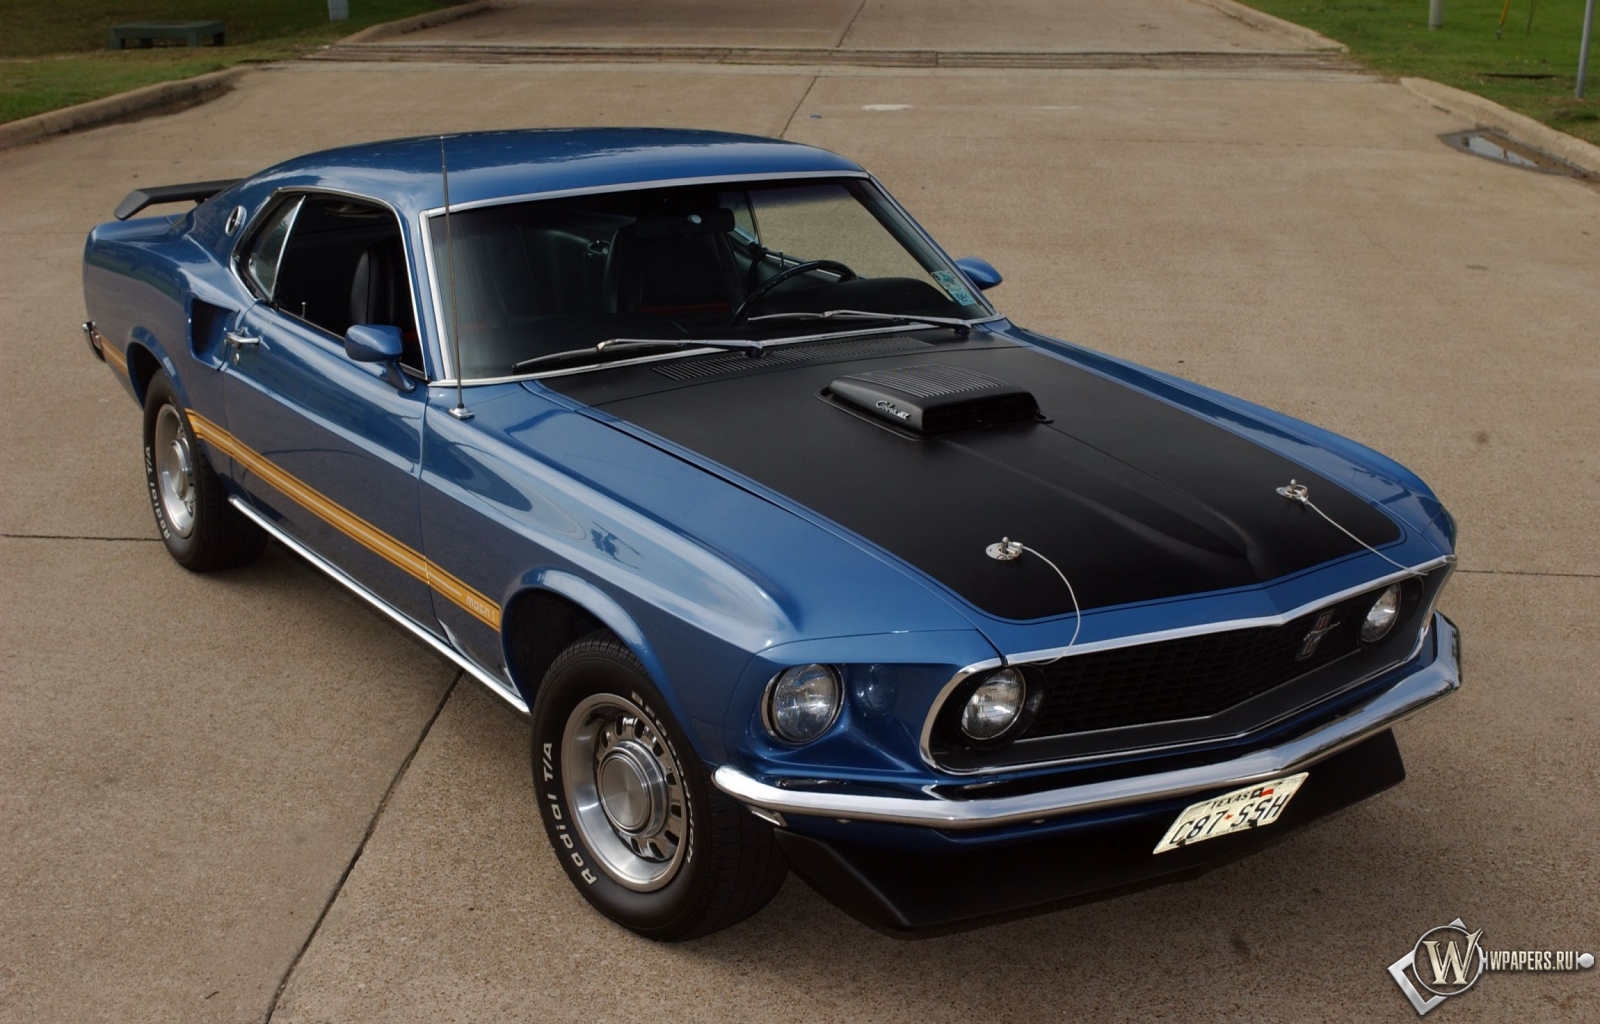 Ford Mustang Mach 1 1969 1600x1024